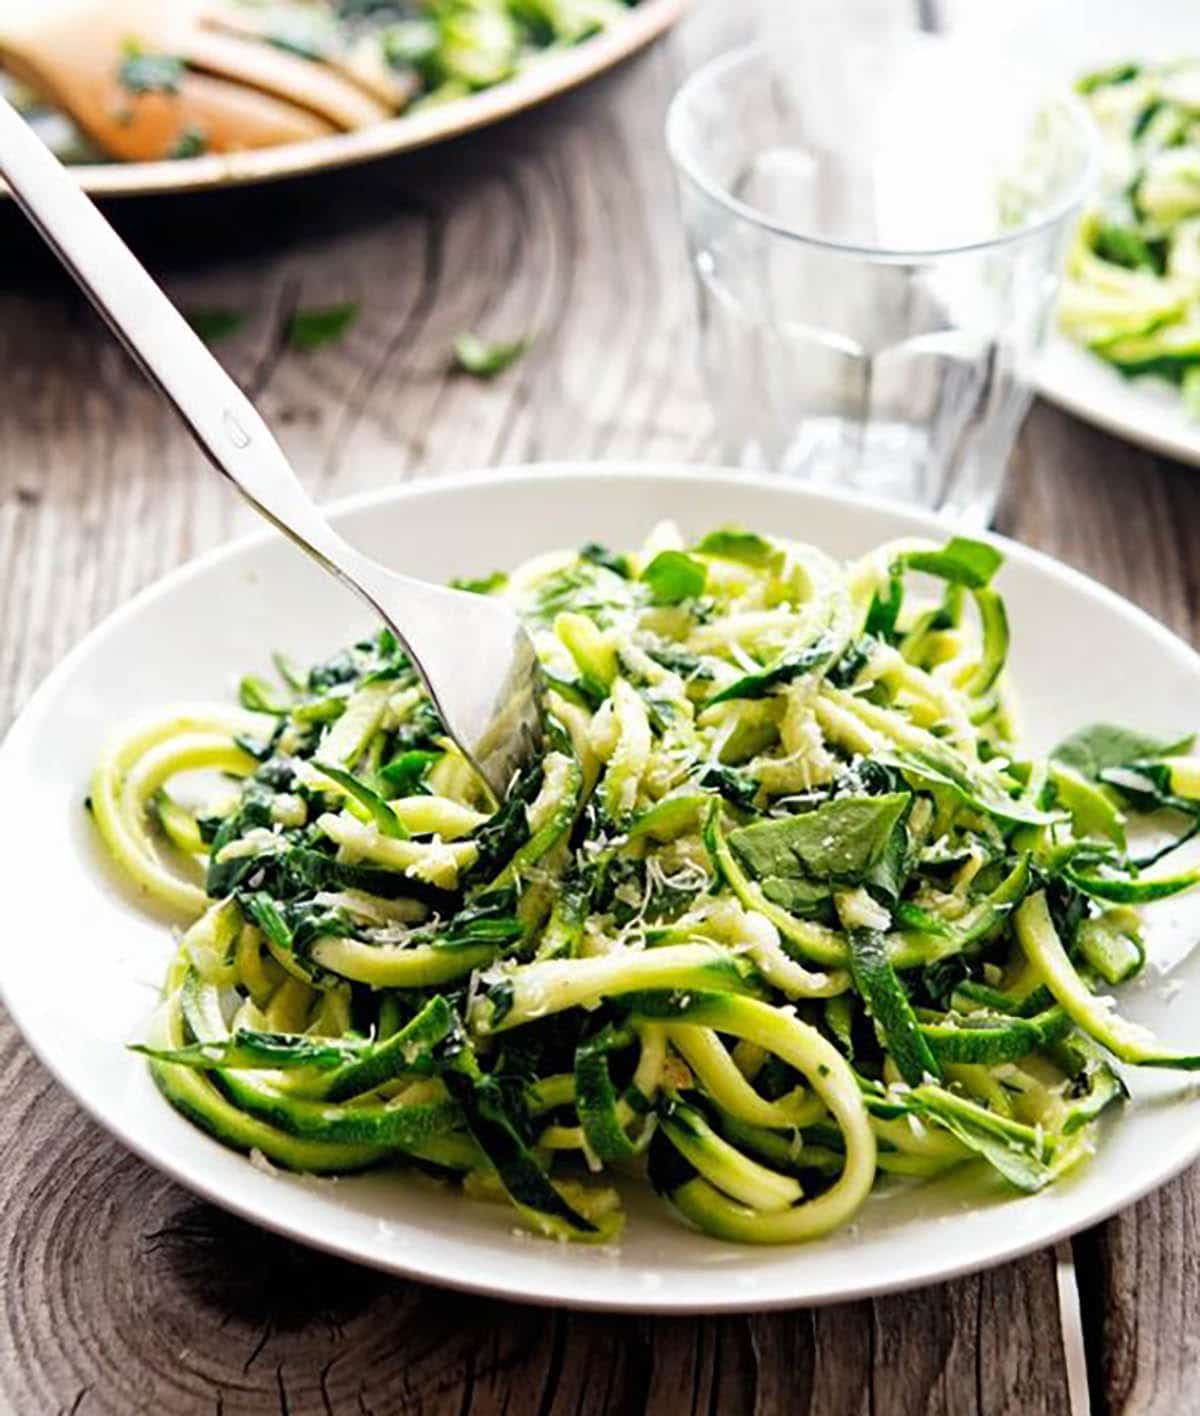 Garlic Butter Zoodles with Herbs and Sprinkled with Grated Parmesan Cheese